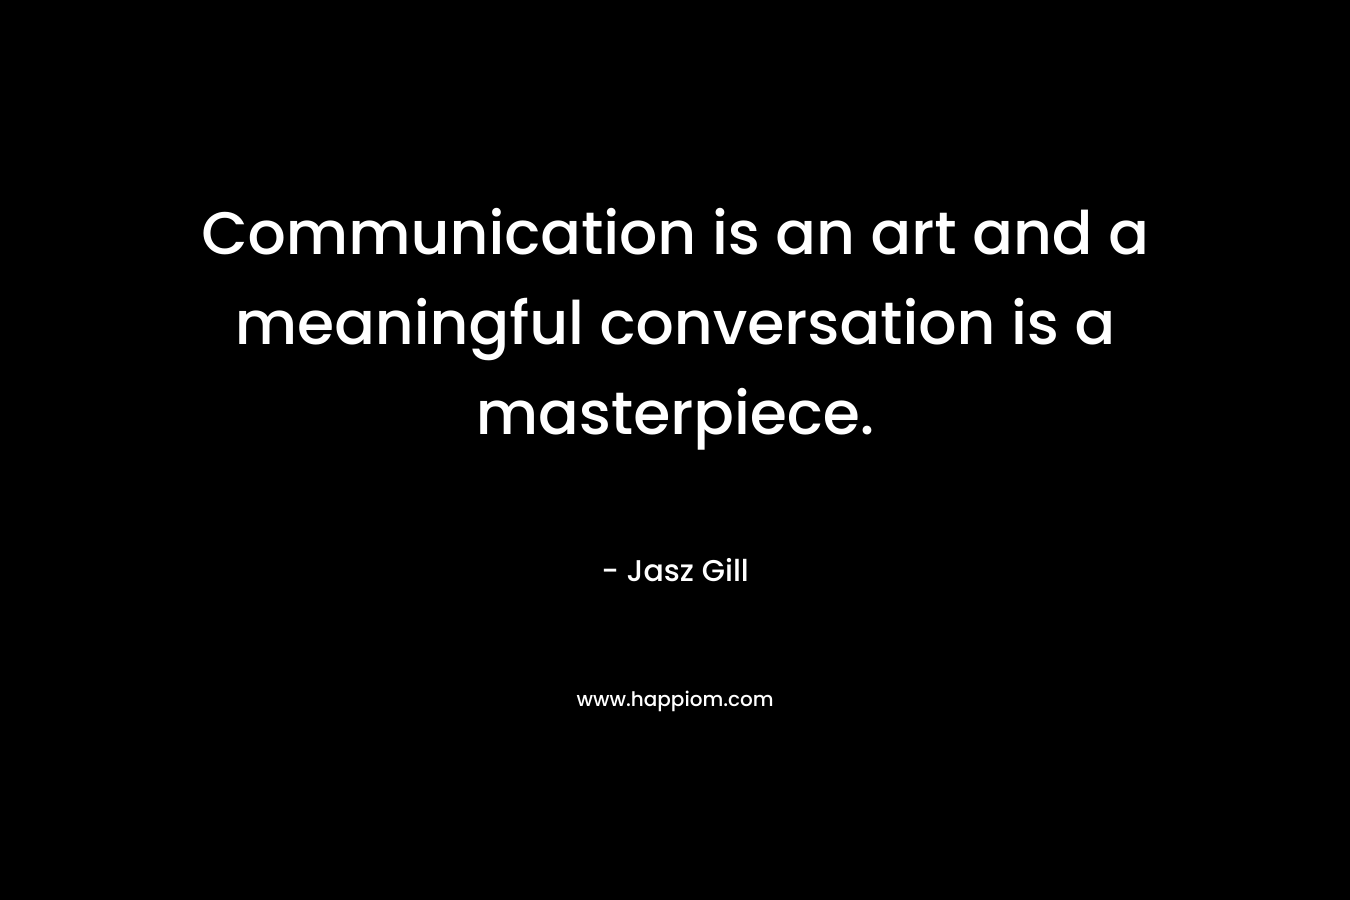 Communication is an art and a meaningful conversation is a masterpiece.